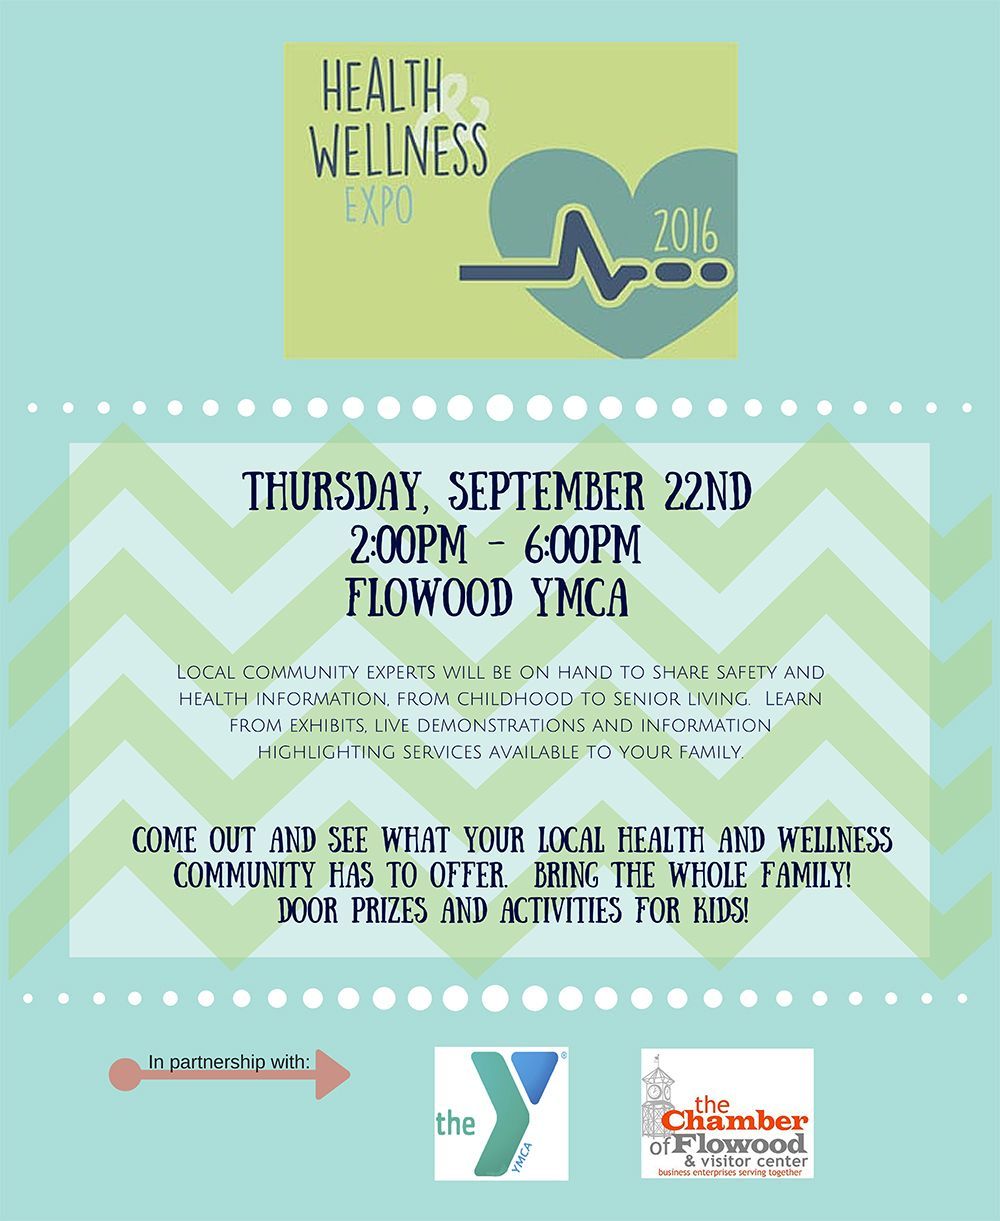 HEALTH AND WELLNESS EXPO FLYER